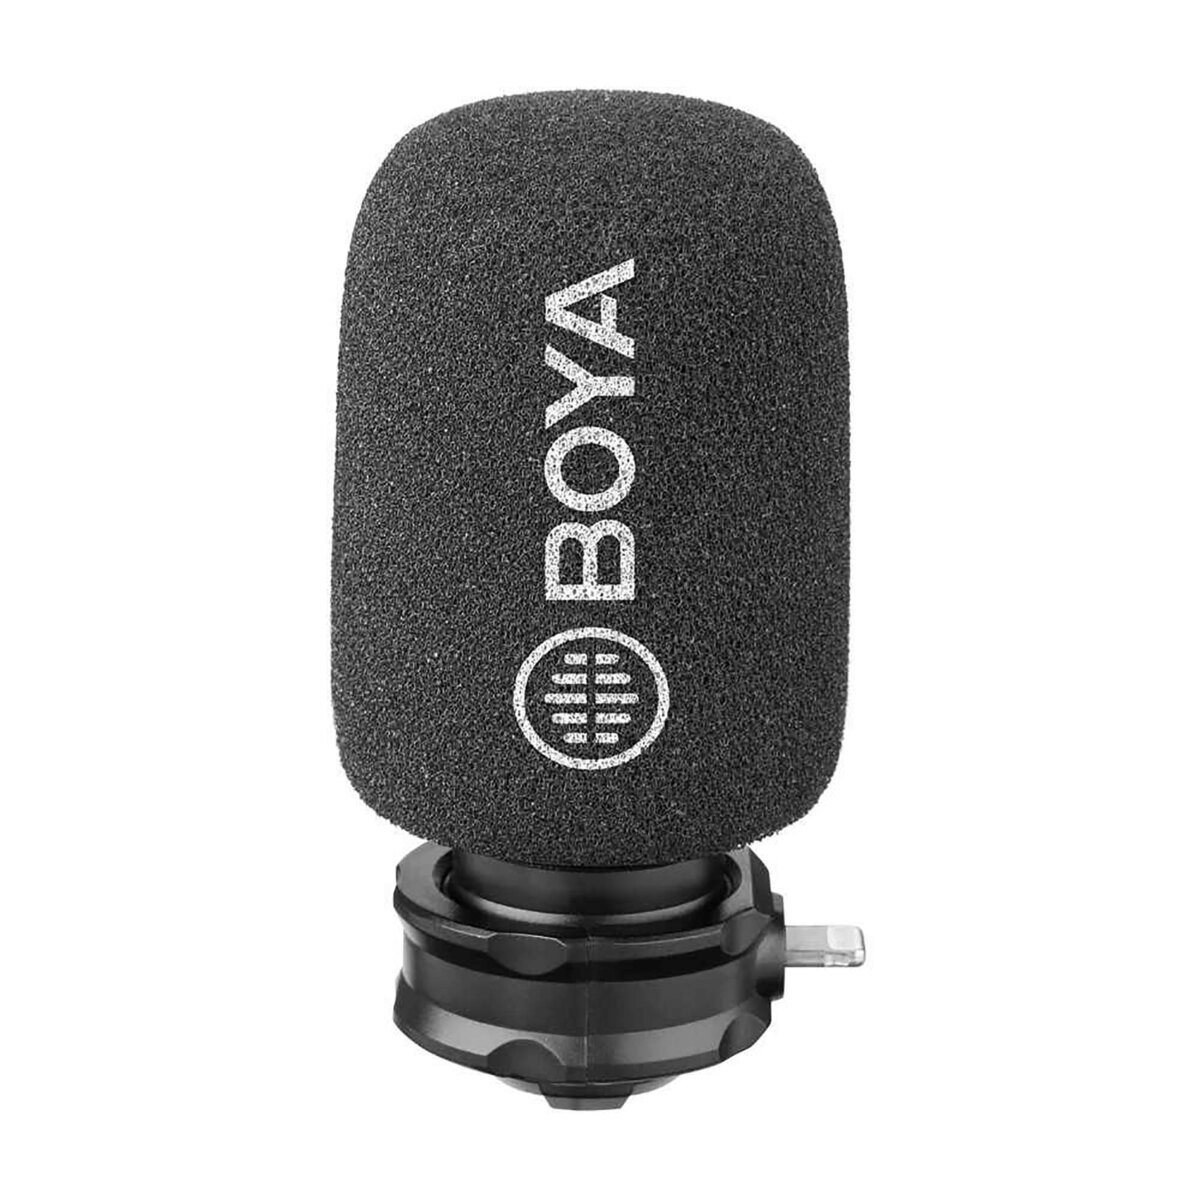 Boya Plug In Smartphone Microphones For iOS devices BY-DM200